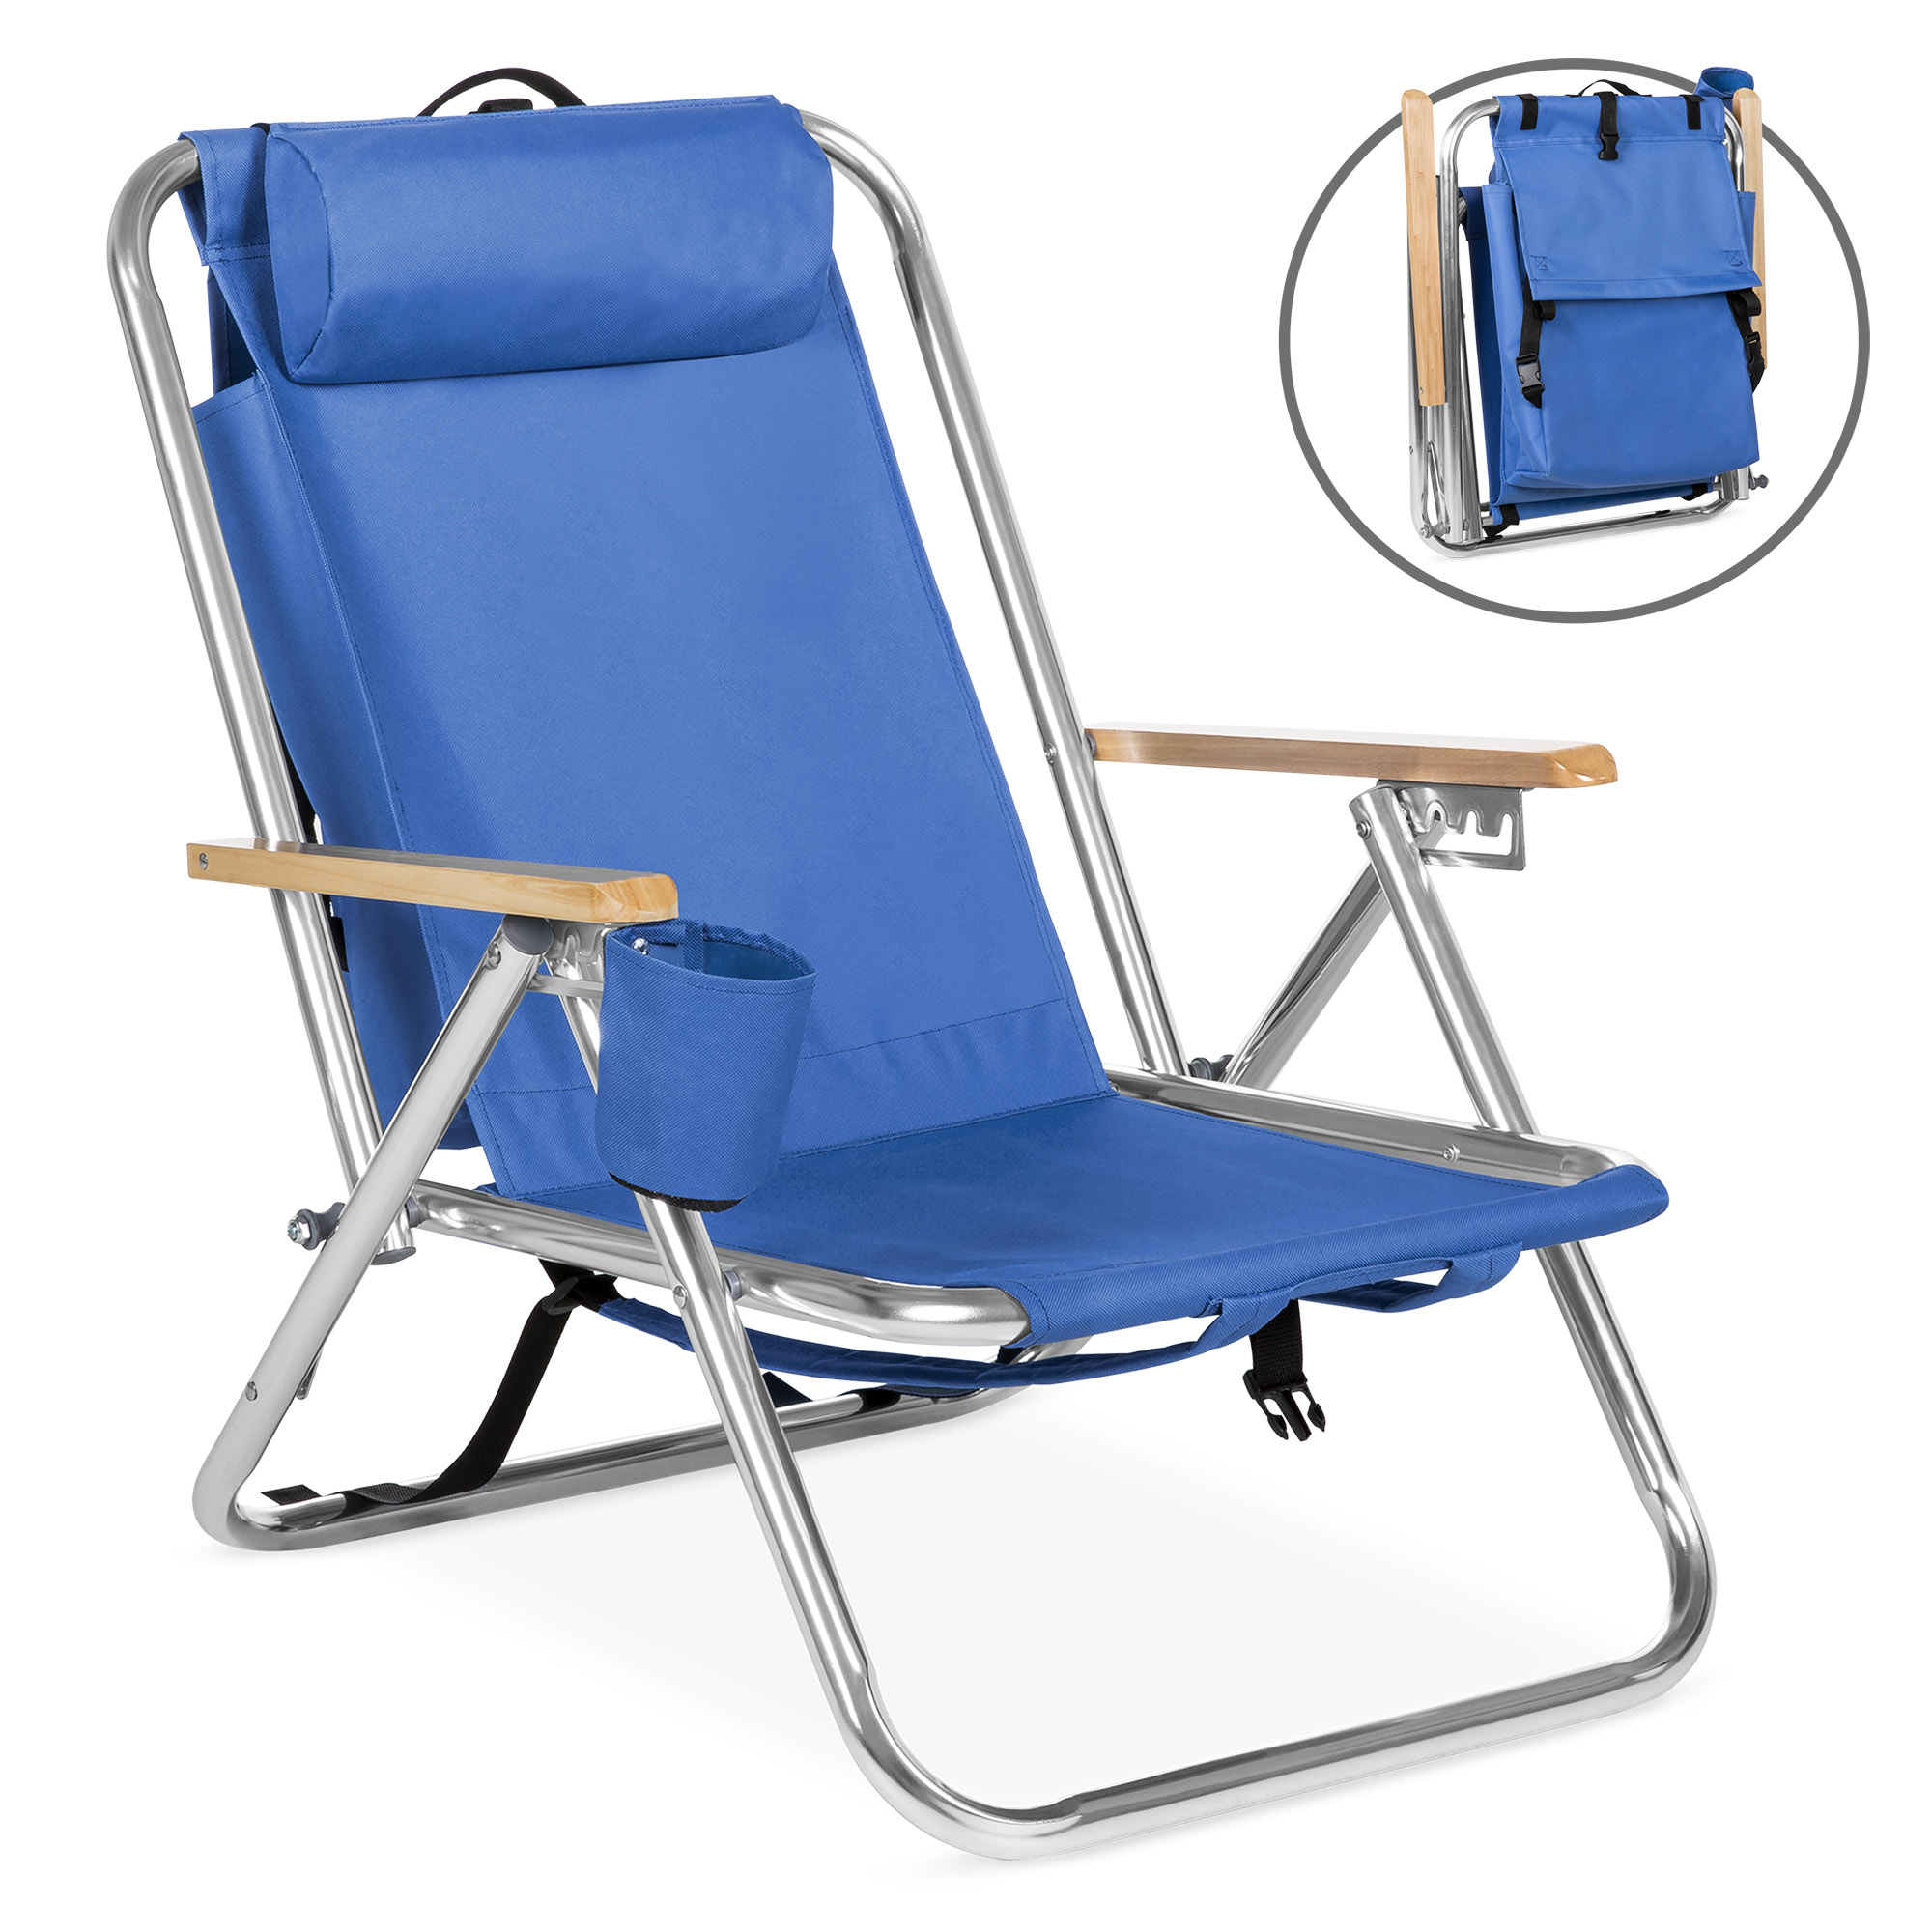 BCP Folding Seat Backpack Chair w/ Padded Headrest, Cup Holder - Blue ...